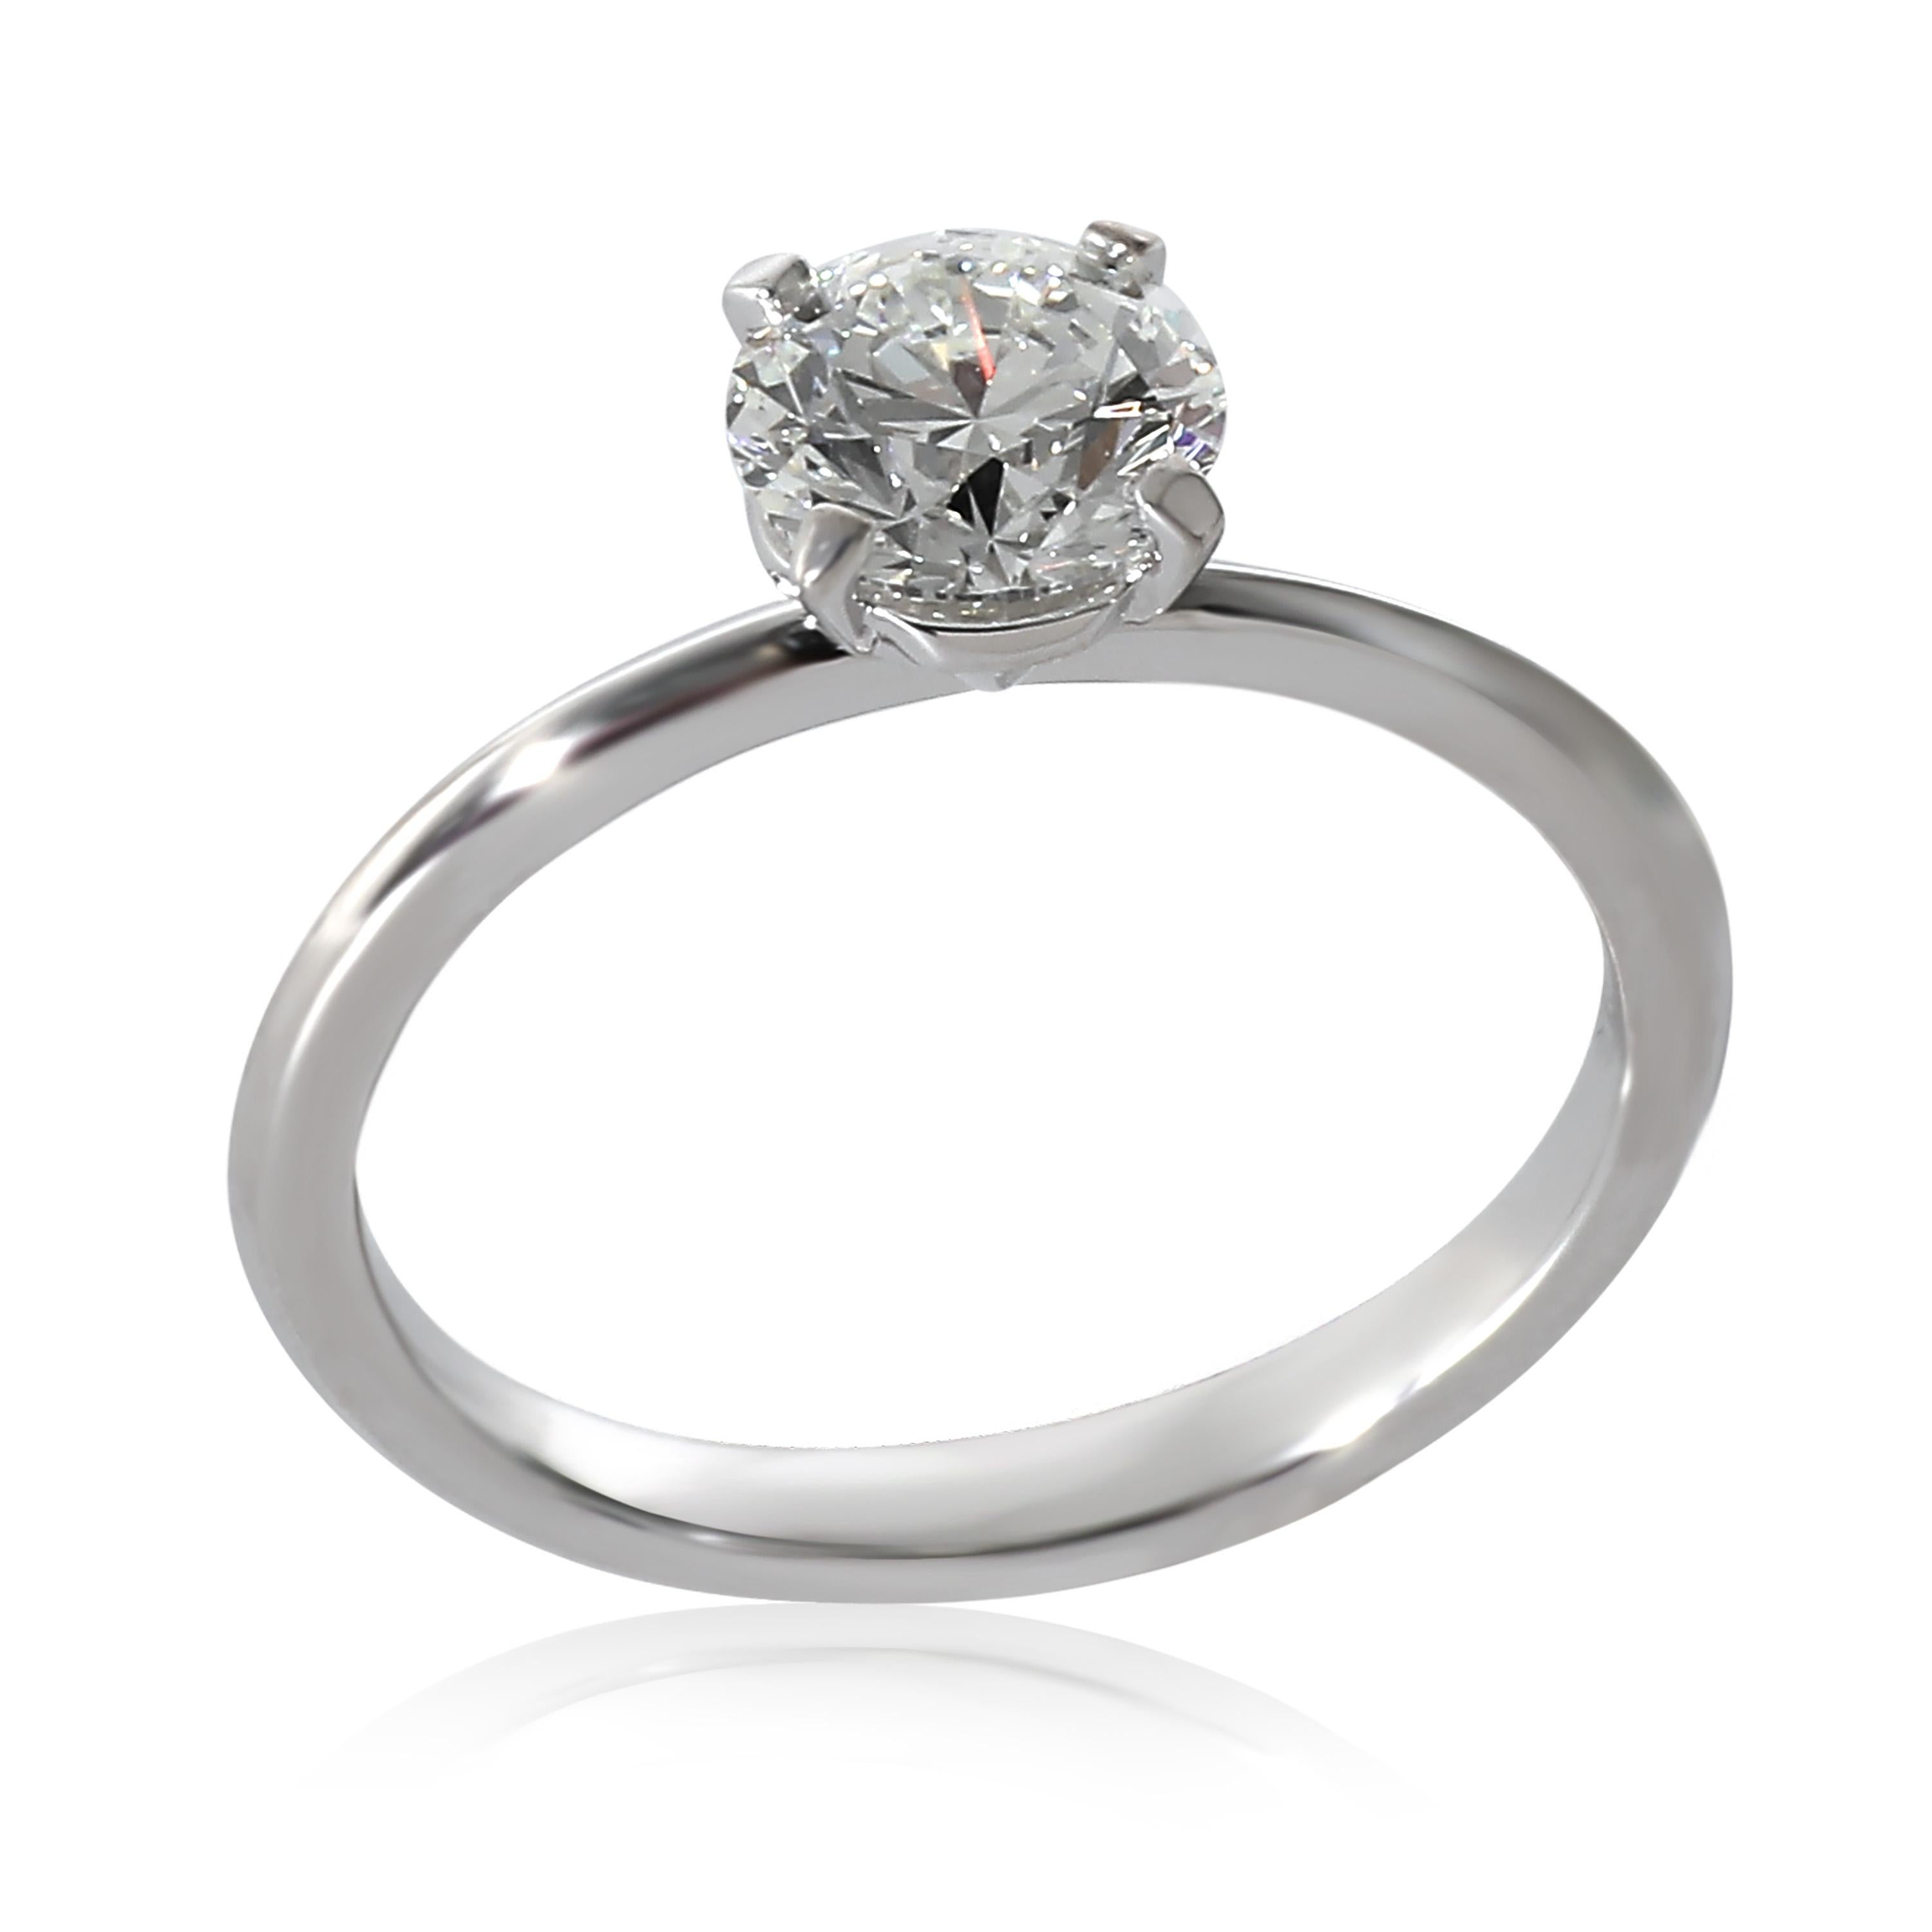 Tiffany & Co. Tiffany True Engagement Ring in Platinum 0.92 CTW

PRIMARY DETAILS
SKU: 135389
Listing Title: Tiffany & Co. Tiffany True Engagement Ring in Platinum 0.92 CTW
Condition Description: Tiffany reinvents a classic with the Return To Tiffany